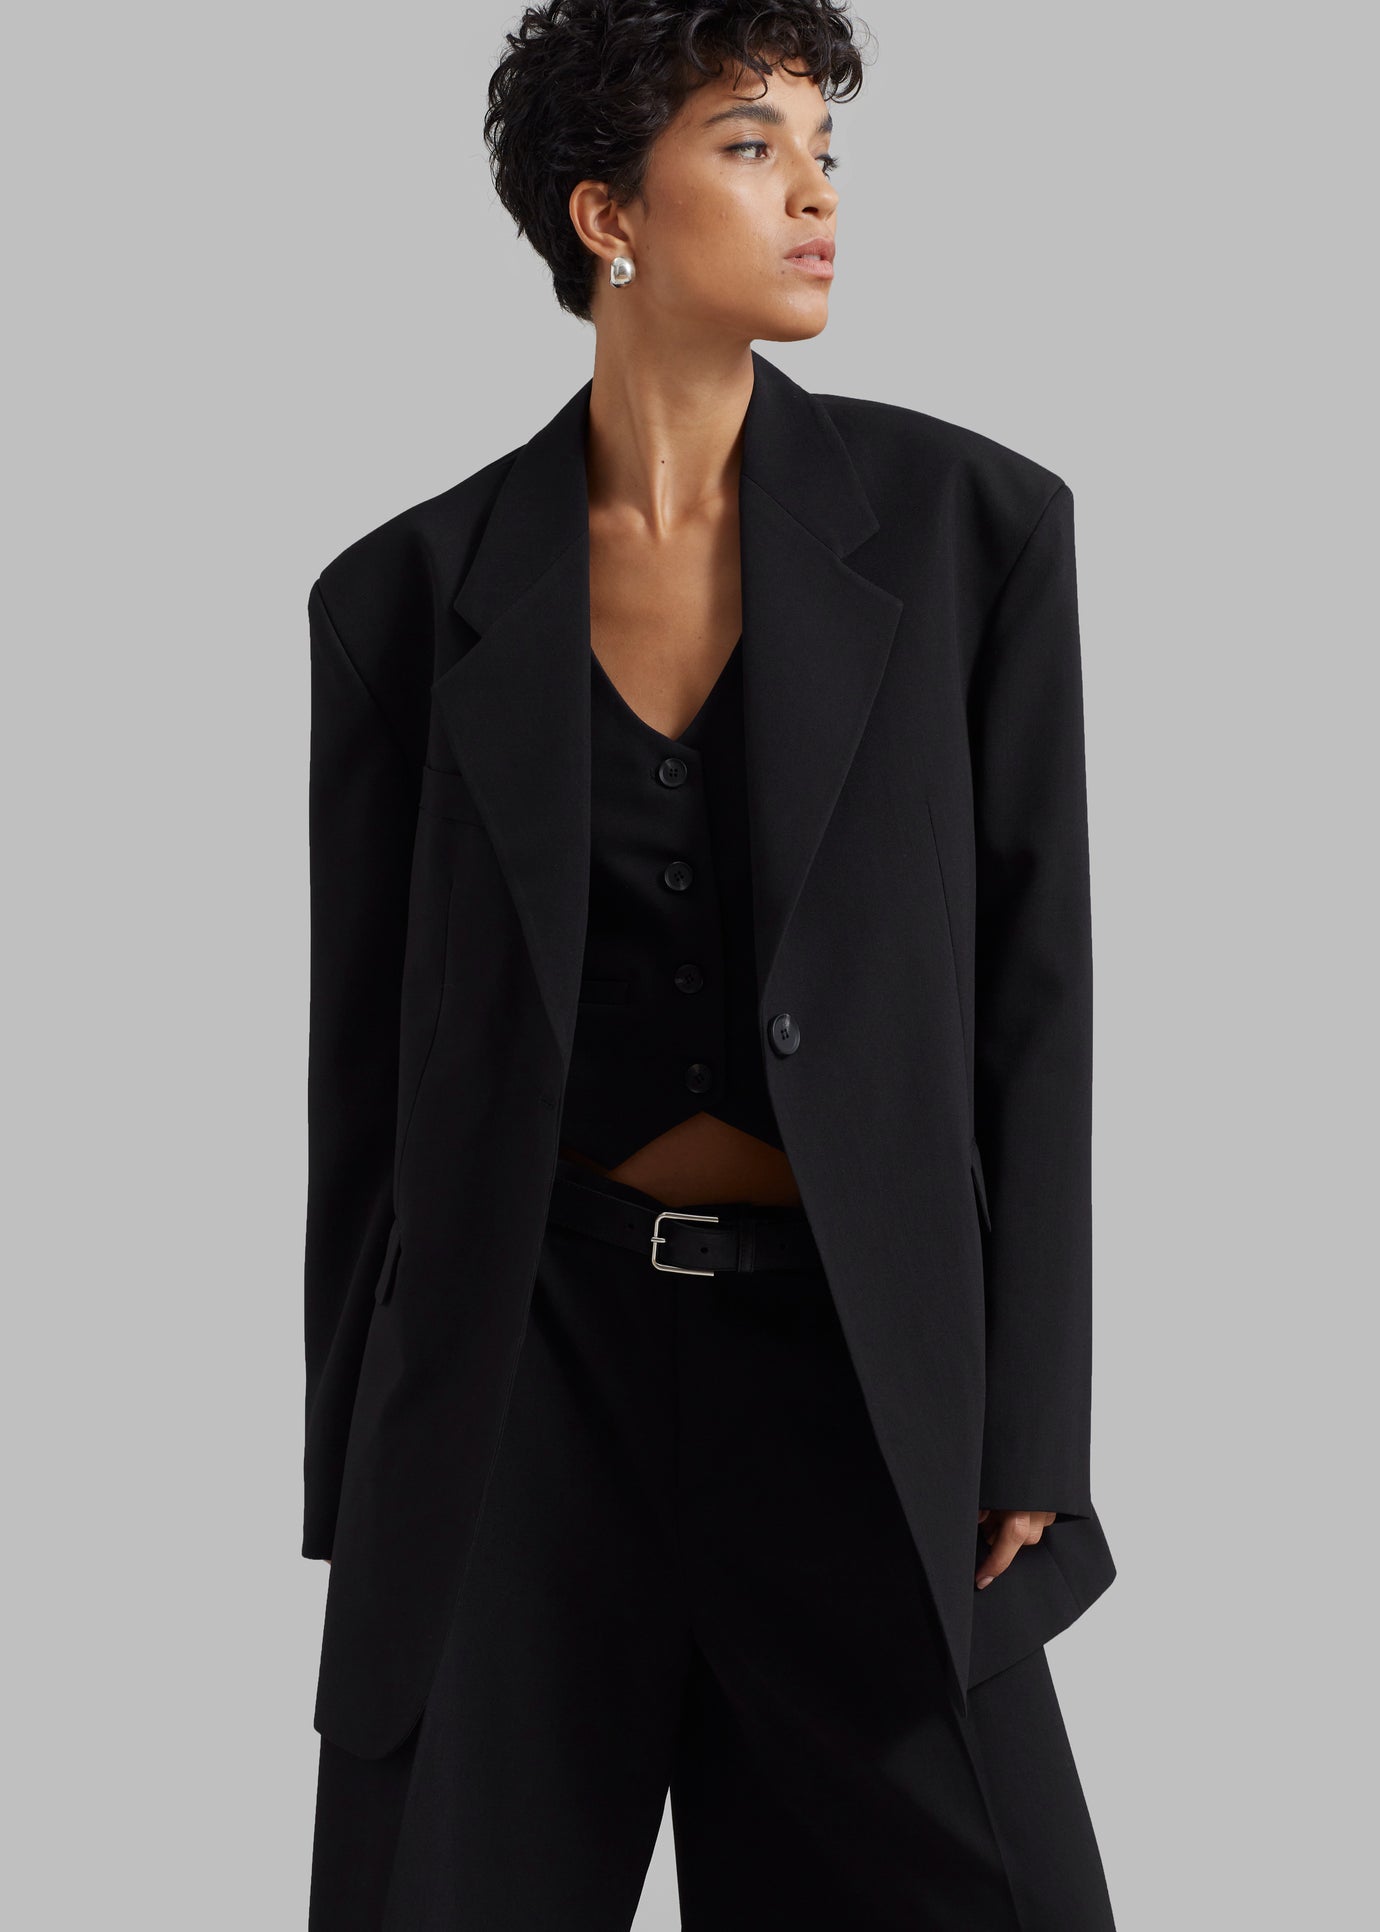 Oversized Suits For Women